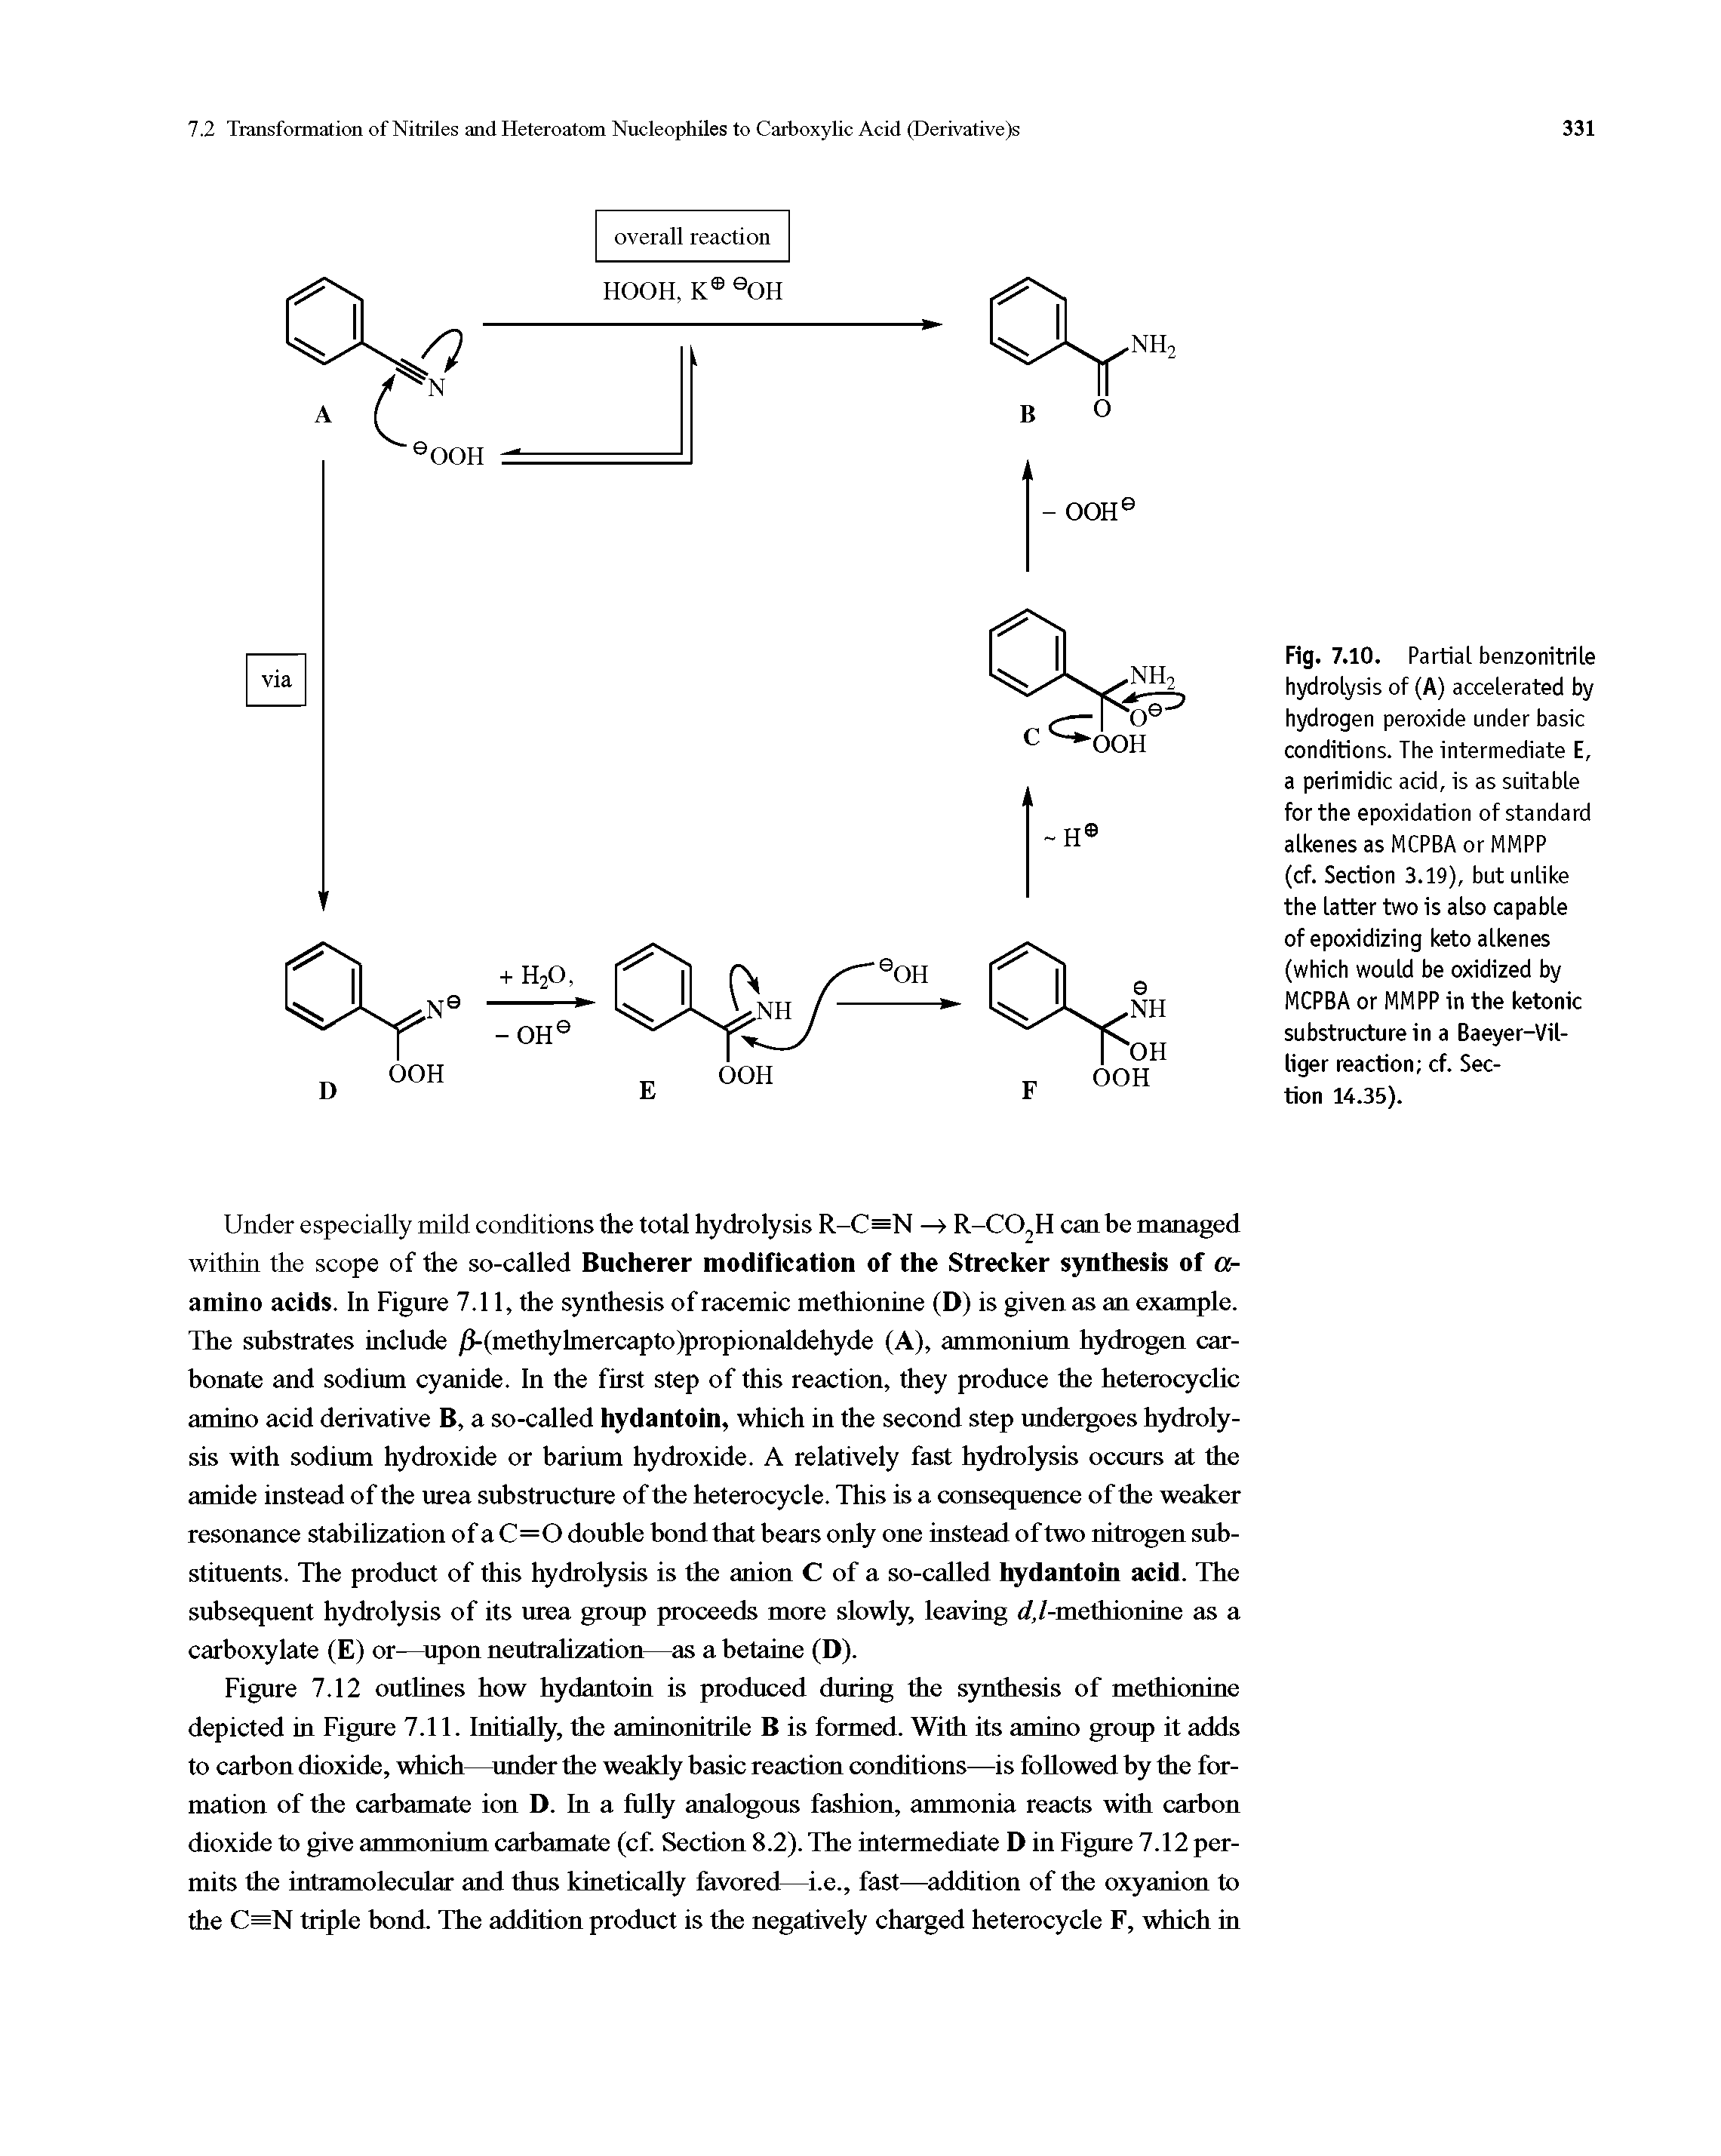 Figure 7.12 outlines how hydantoin is produced during the synthesis of methionine depicted in Figure 7.11. Initially, the aminonitrile B is formed. With its amino group it adds to carbon dioxide, which—under the weakly basic reaction conditions—is followed by the formation of the carbamate ion D. In a fully analogous fashion, ammonia reacts with carbon dioxide to give ammonium carbamate (cf. Section 8.2). The intermediate D in Figure 7.12 permits the intramolecular and thus kinetically favored—i.e., fast—addition of the oxyanion to the C=N triple bond. The addition product is the negatively charged heterocycle F, which in...